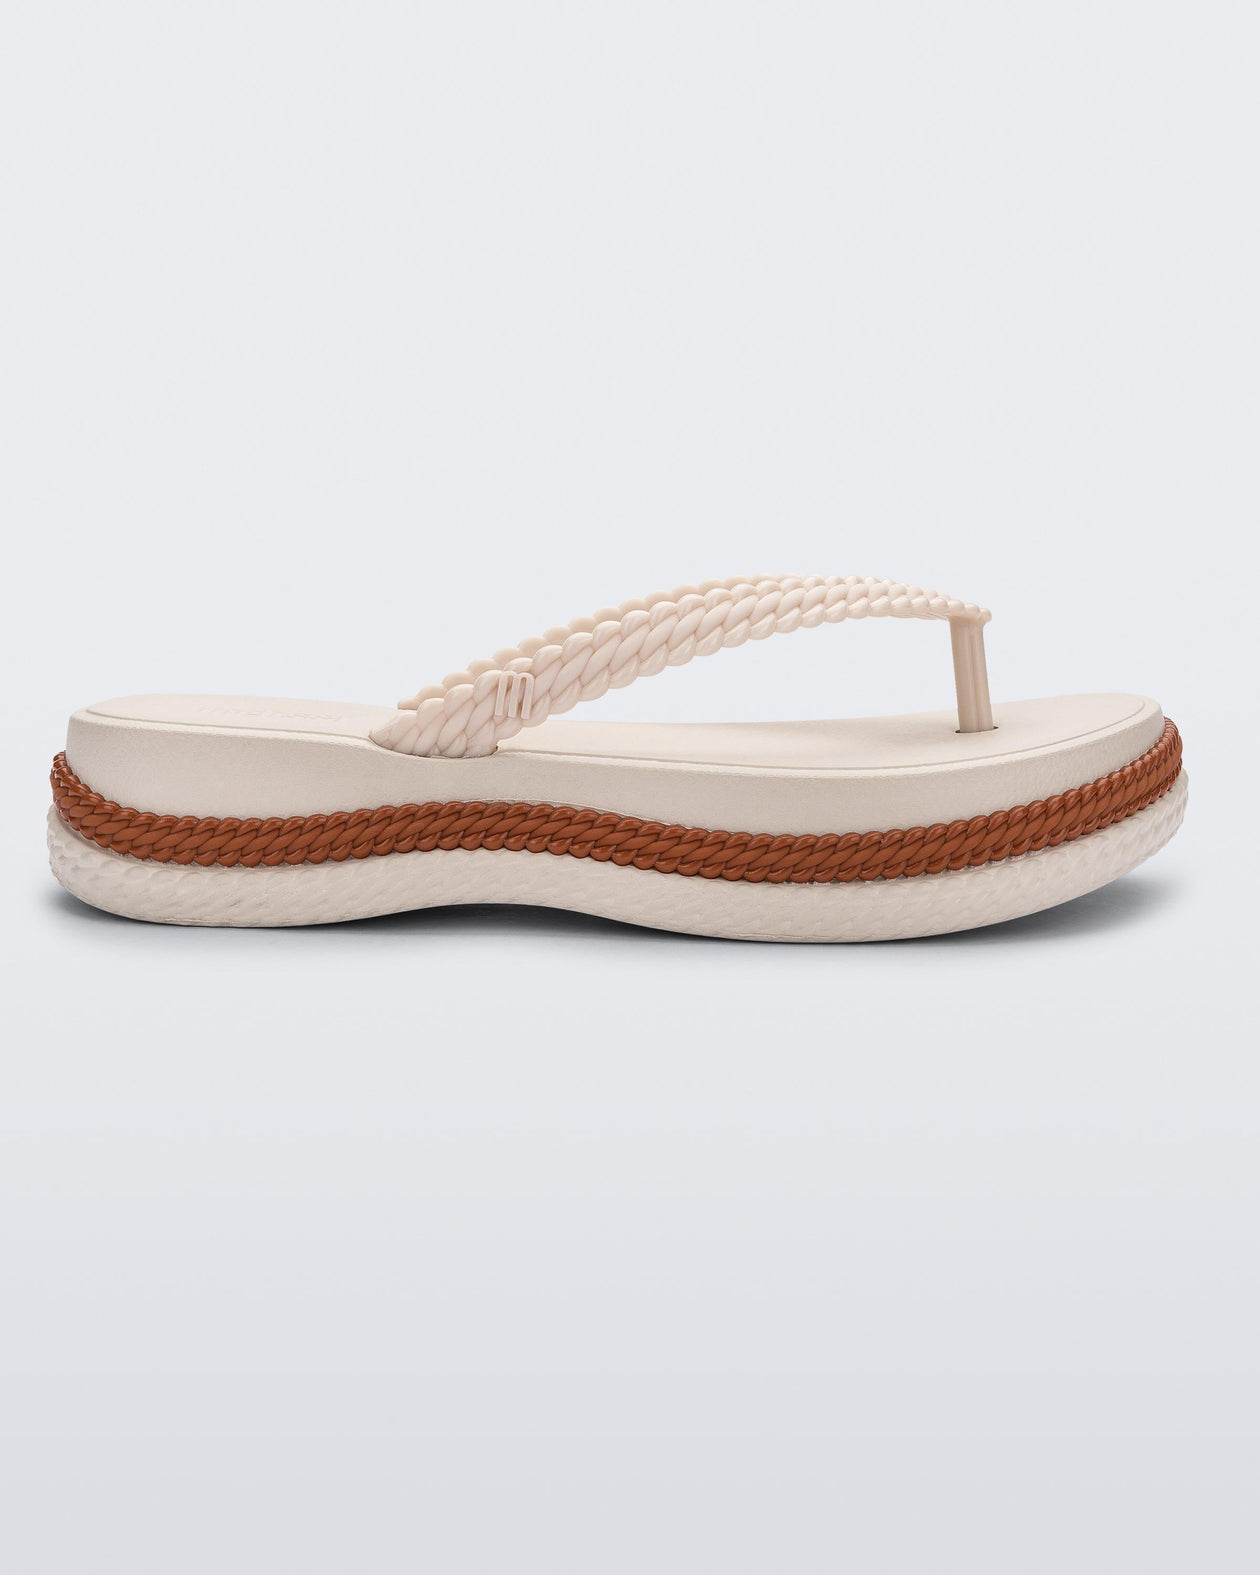 Side view of a beige/brown Melissa Leblon platform flip flop with details that mimic sisal braids on the sole and strap